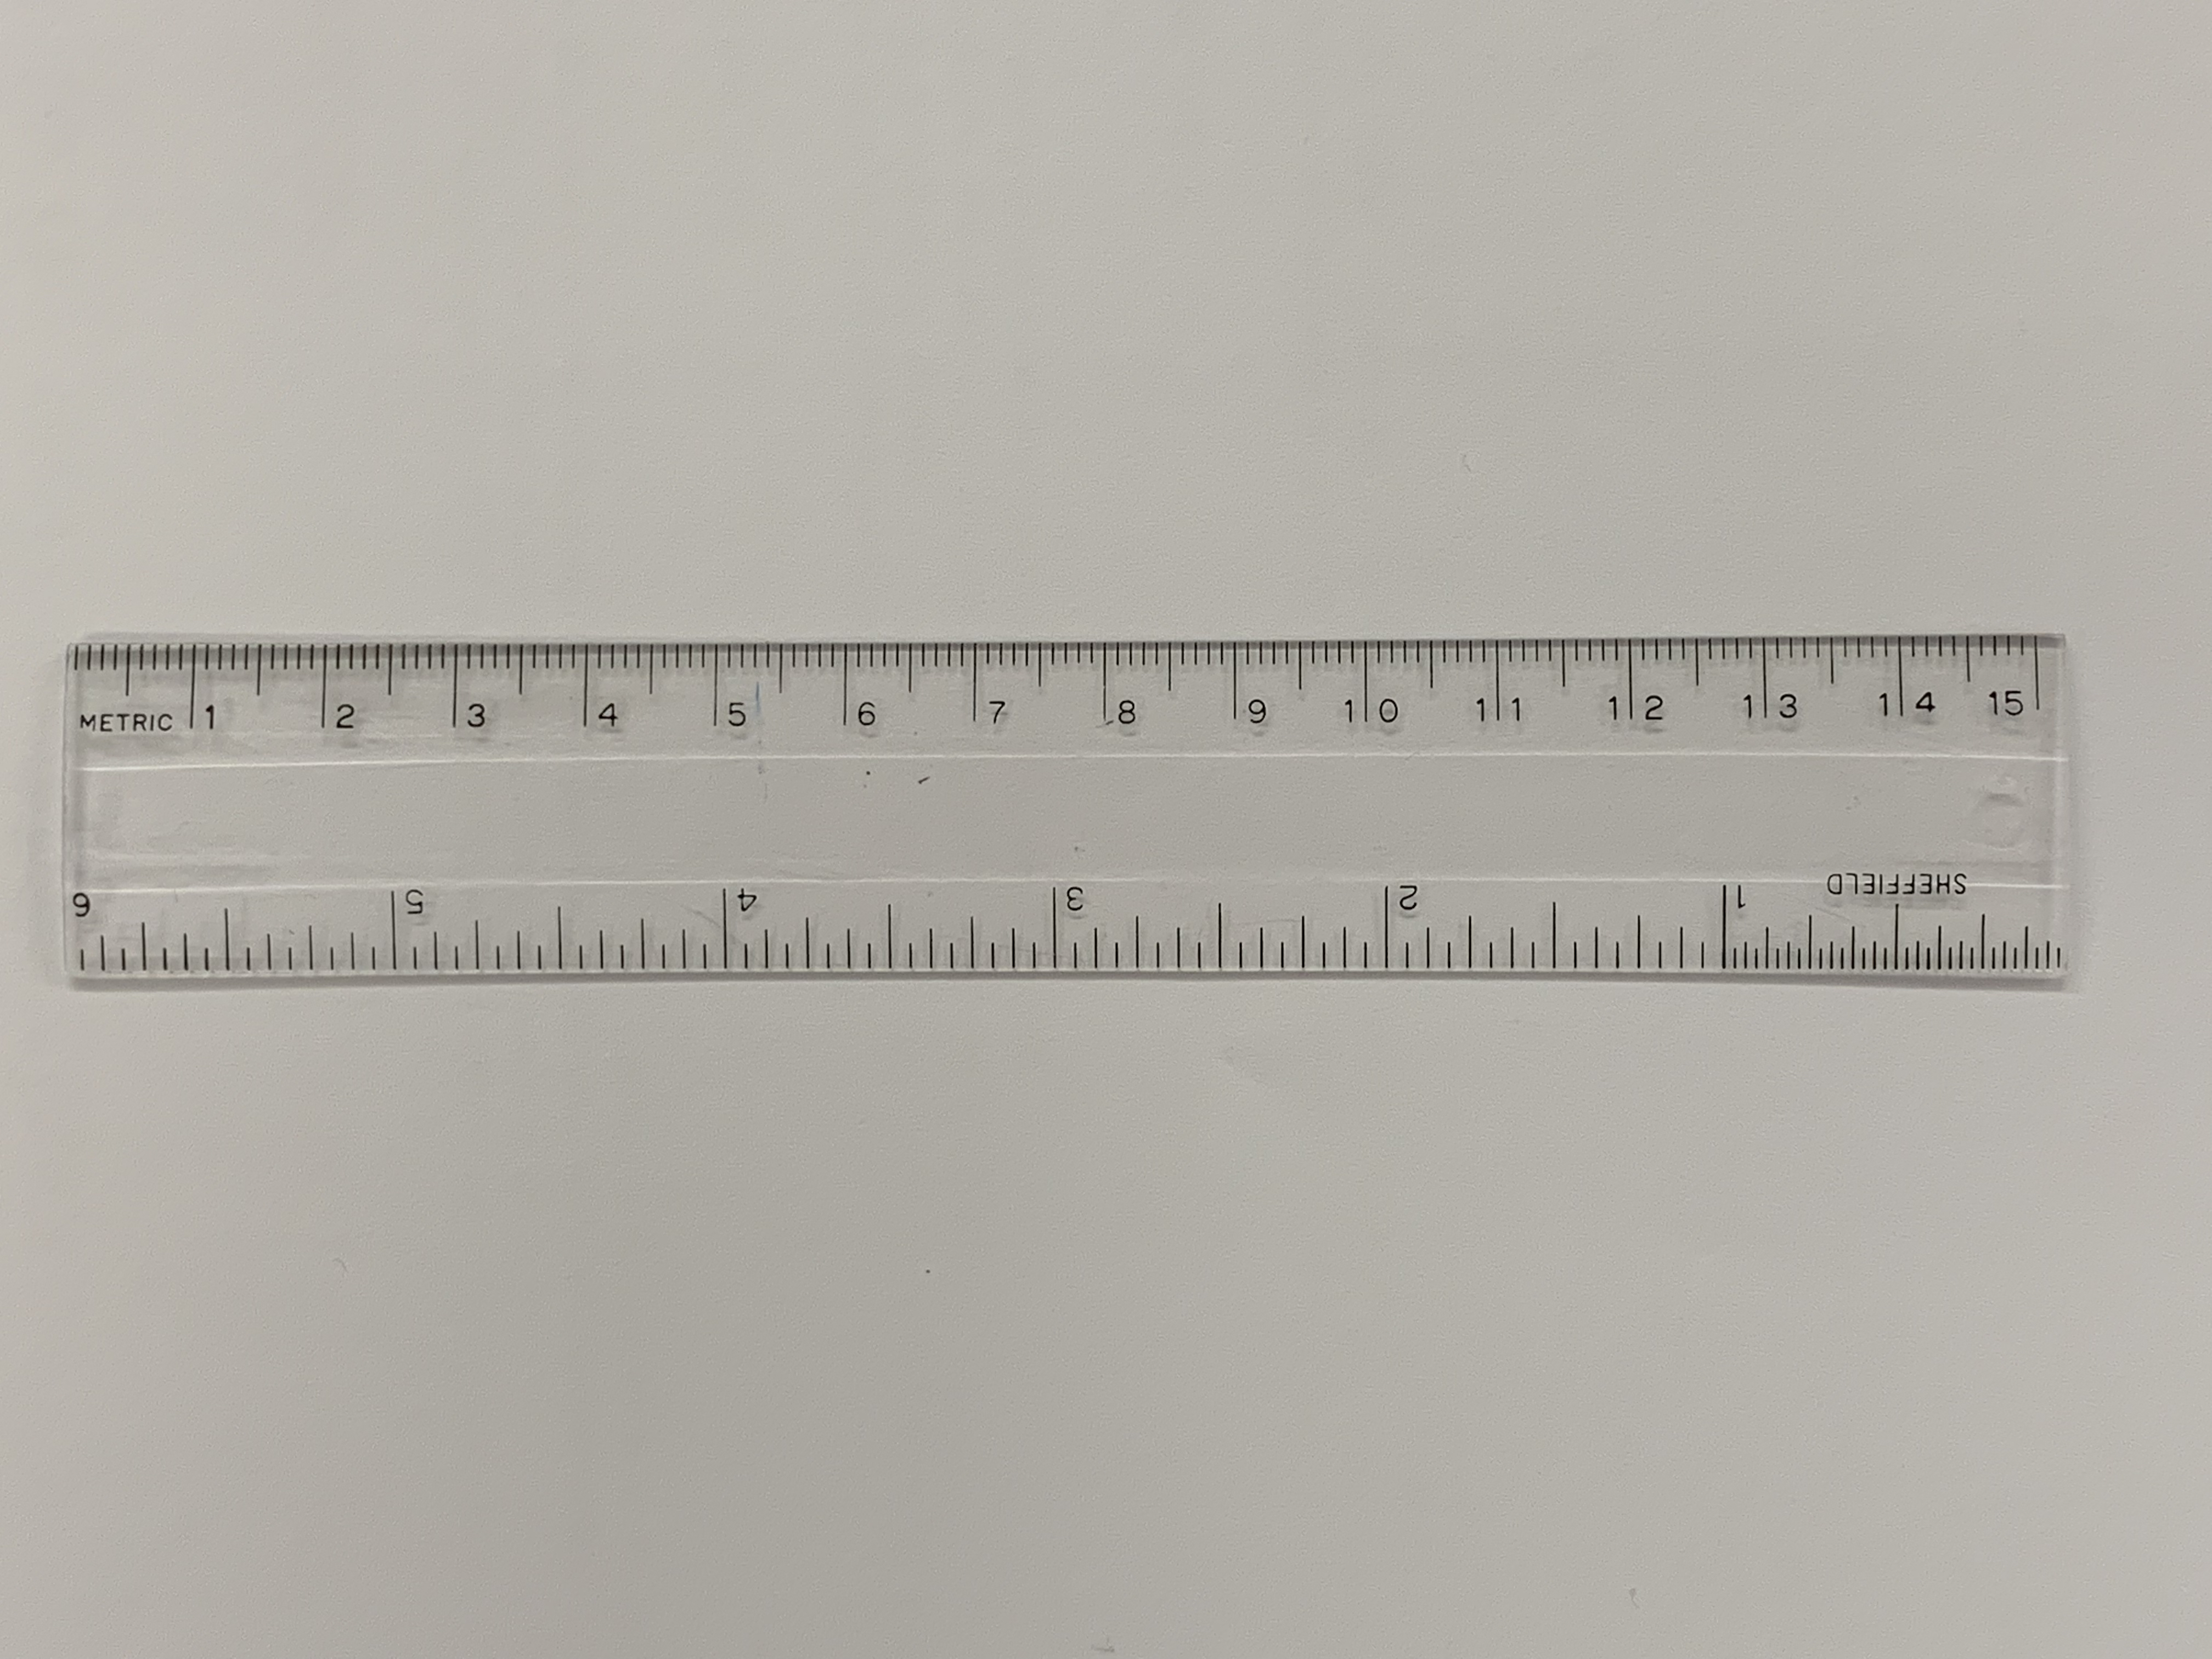 A ruler with metric (cm) and imperial (inch) scales.